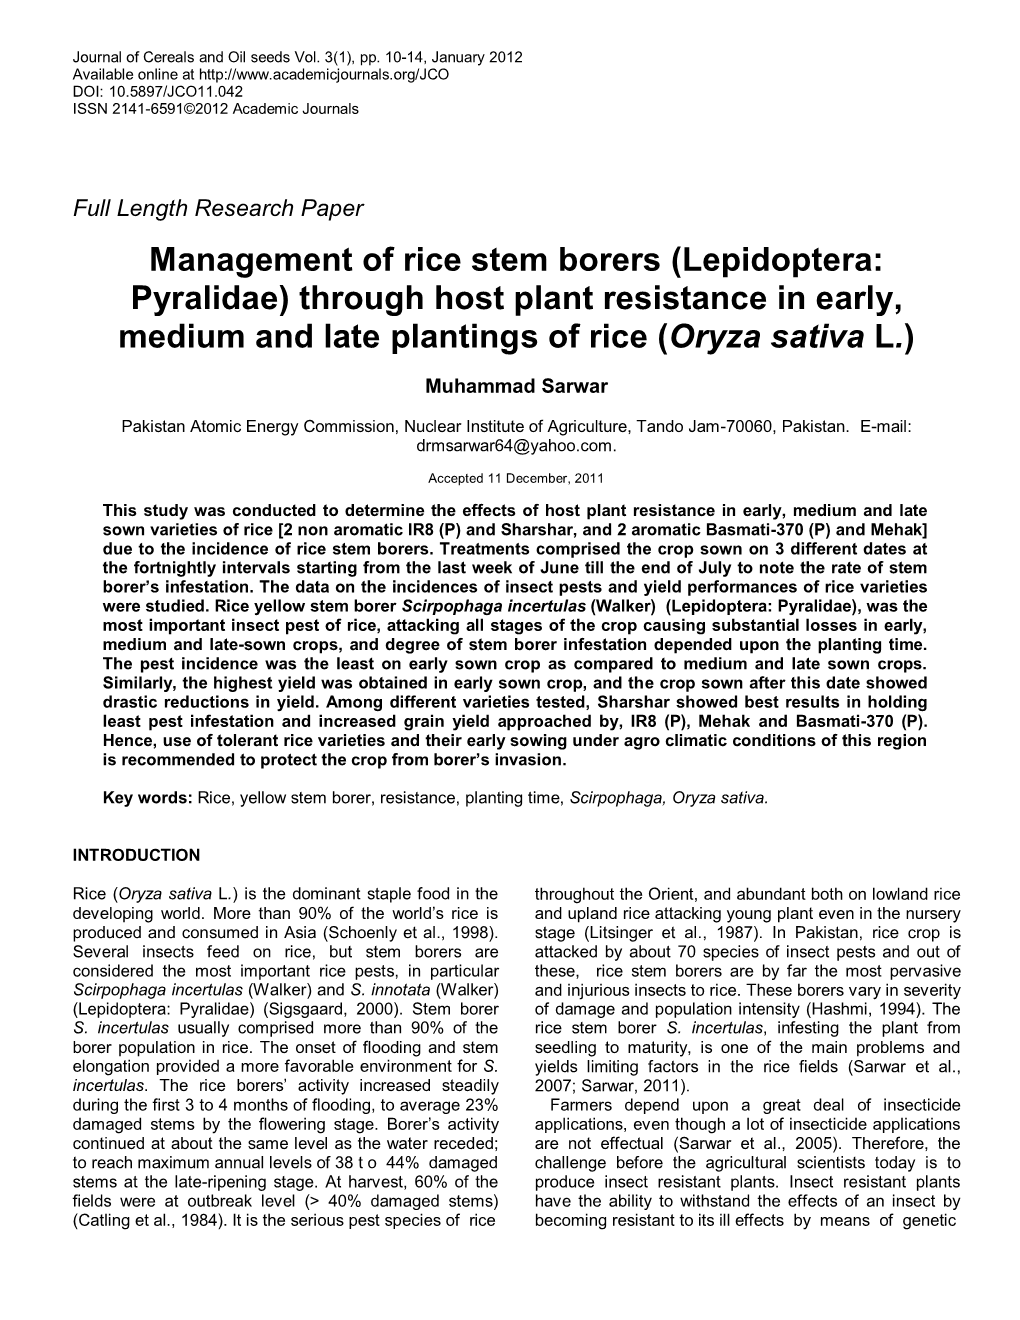 Management of Rice Stem Borers (Lepidoptera: Pyralidae) Through Host Plant Resistance in Early, Medium and Late Plantings of Rice (Oryza Sativa L.)